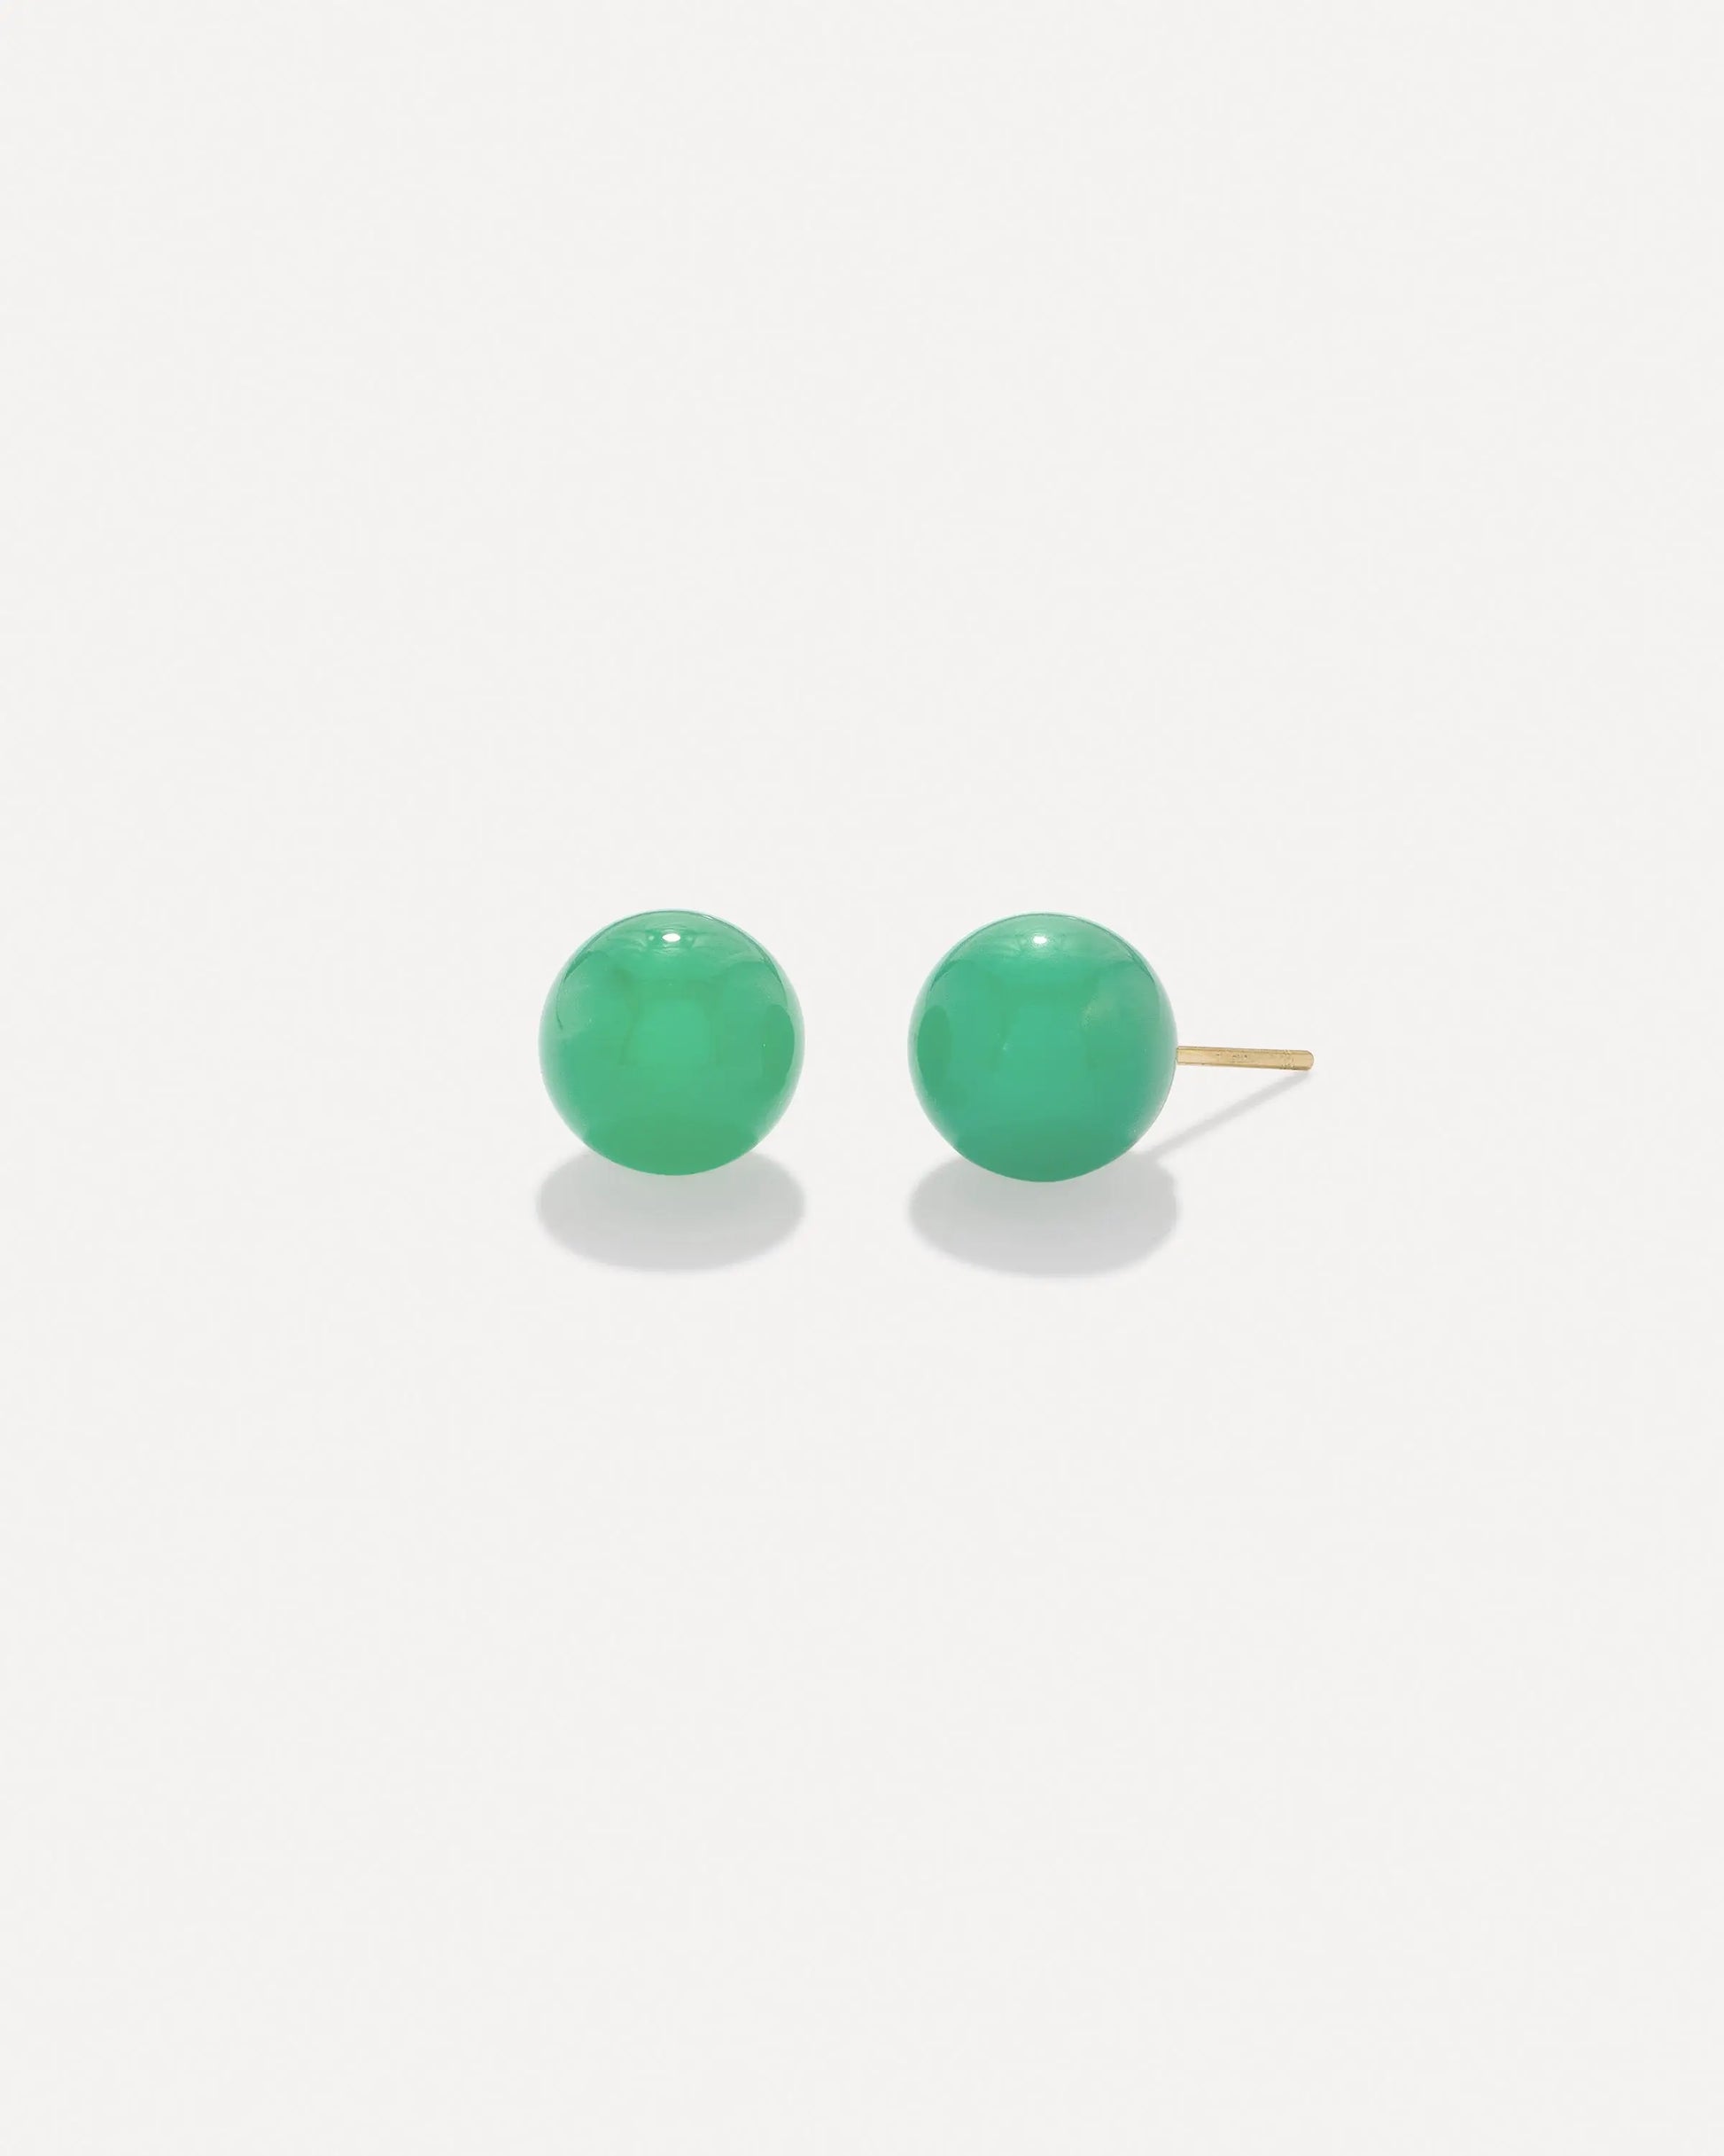 18k yellow gold studs in chrysoprase in 11mm  Earring weight 2.5 grams each Post and Nut Closure Designed and handmade in Los Angeles If an item is out of stock, please allow 3-6 weeks for delivery  Designed by Irene Neuwirth